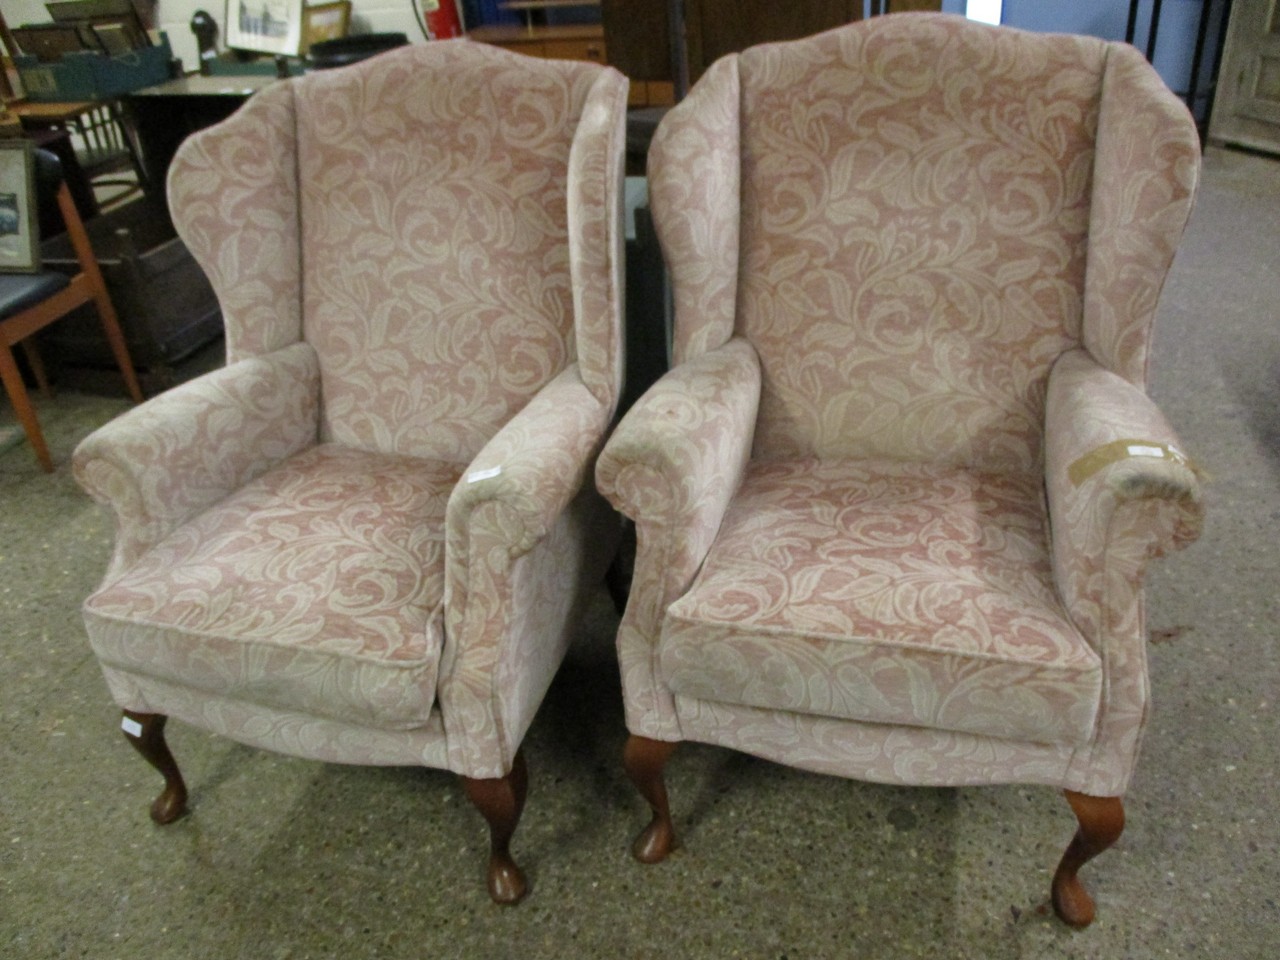 PAIR OF MODERN PINK FLORAL WING ARMCHAIRS WITH BEECHWOOD LEGS